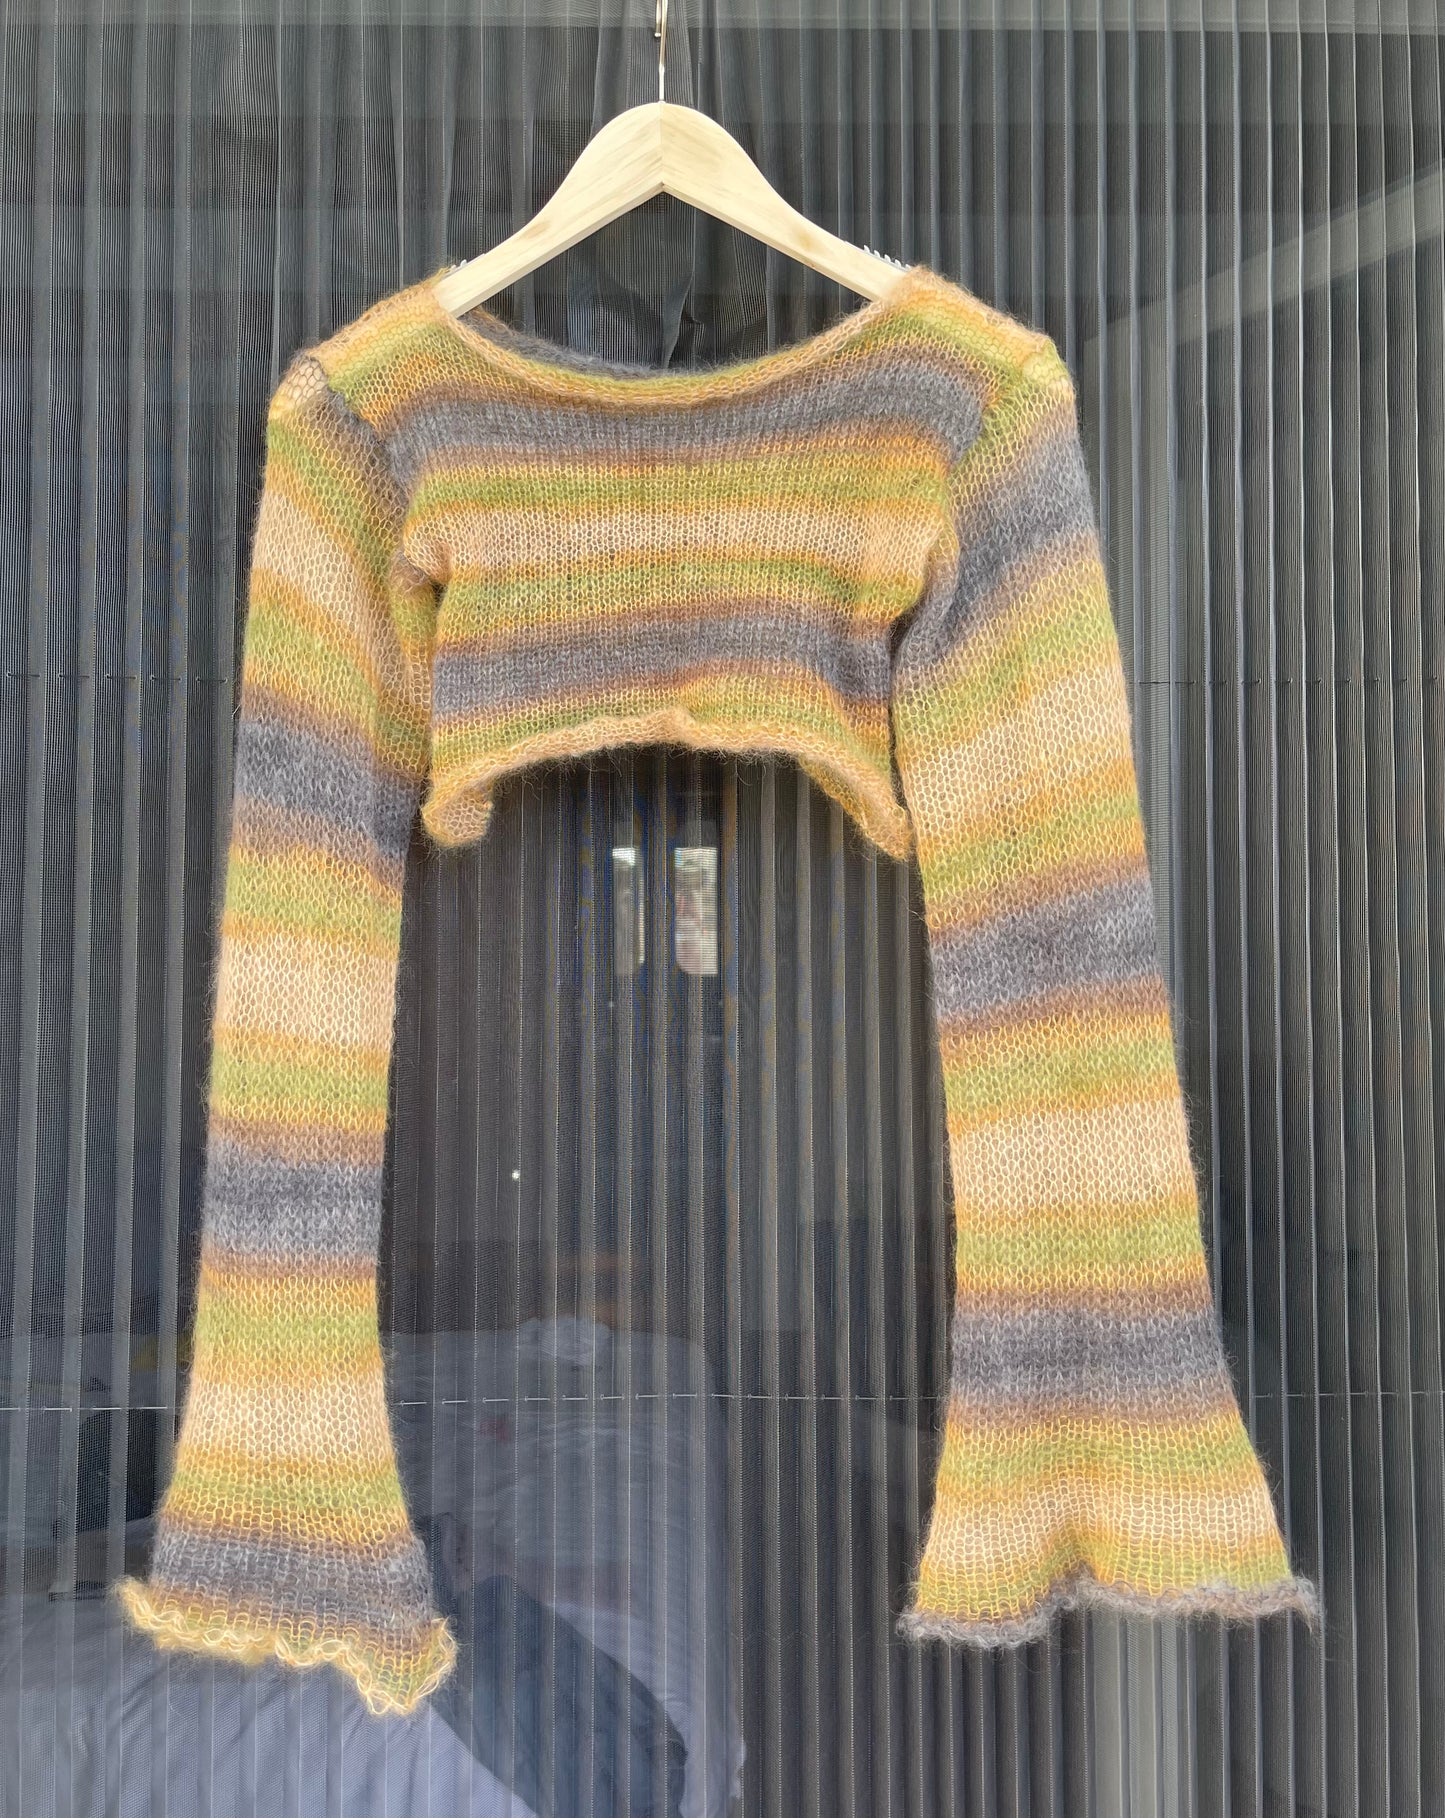 Handmade knitted mohair cropped jumper in ombré earth tones